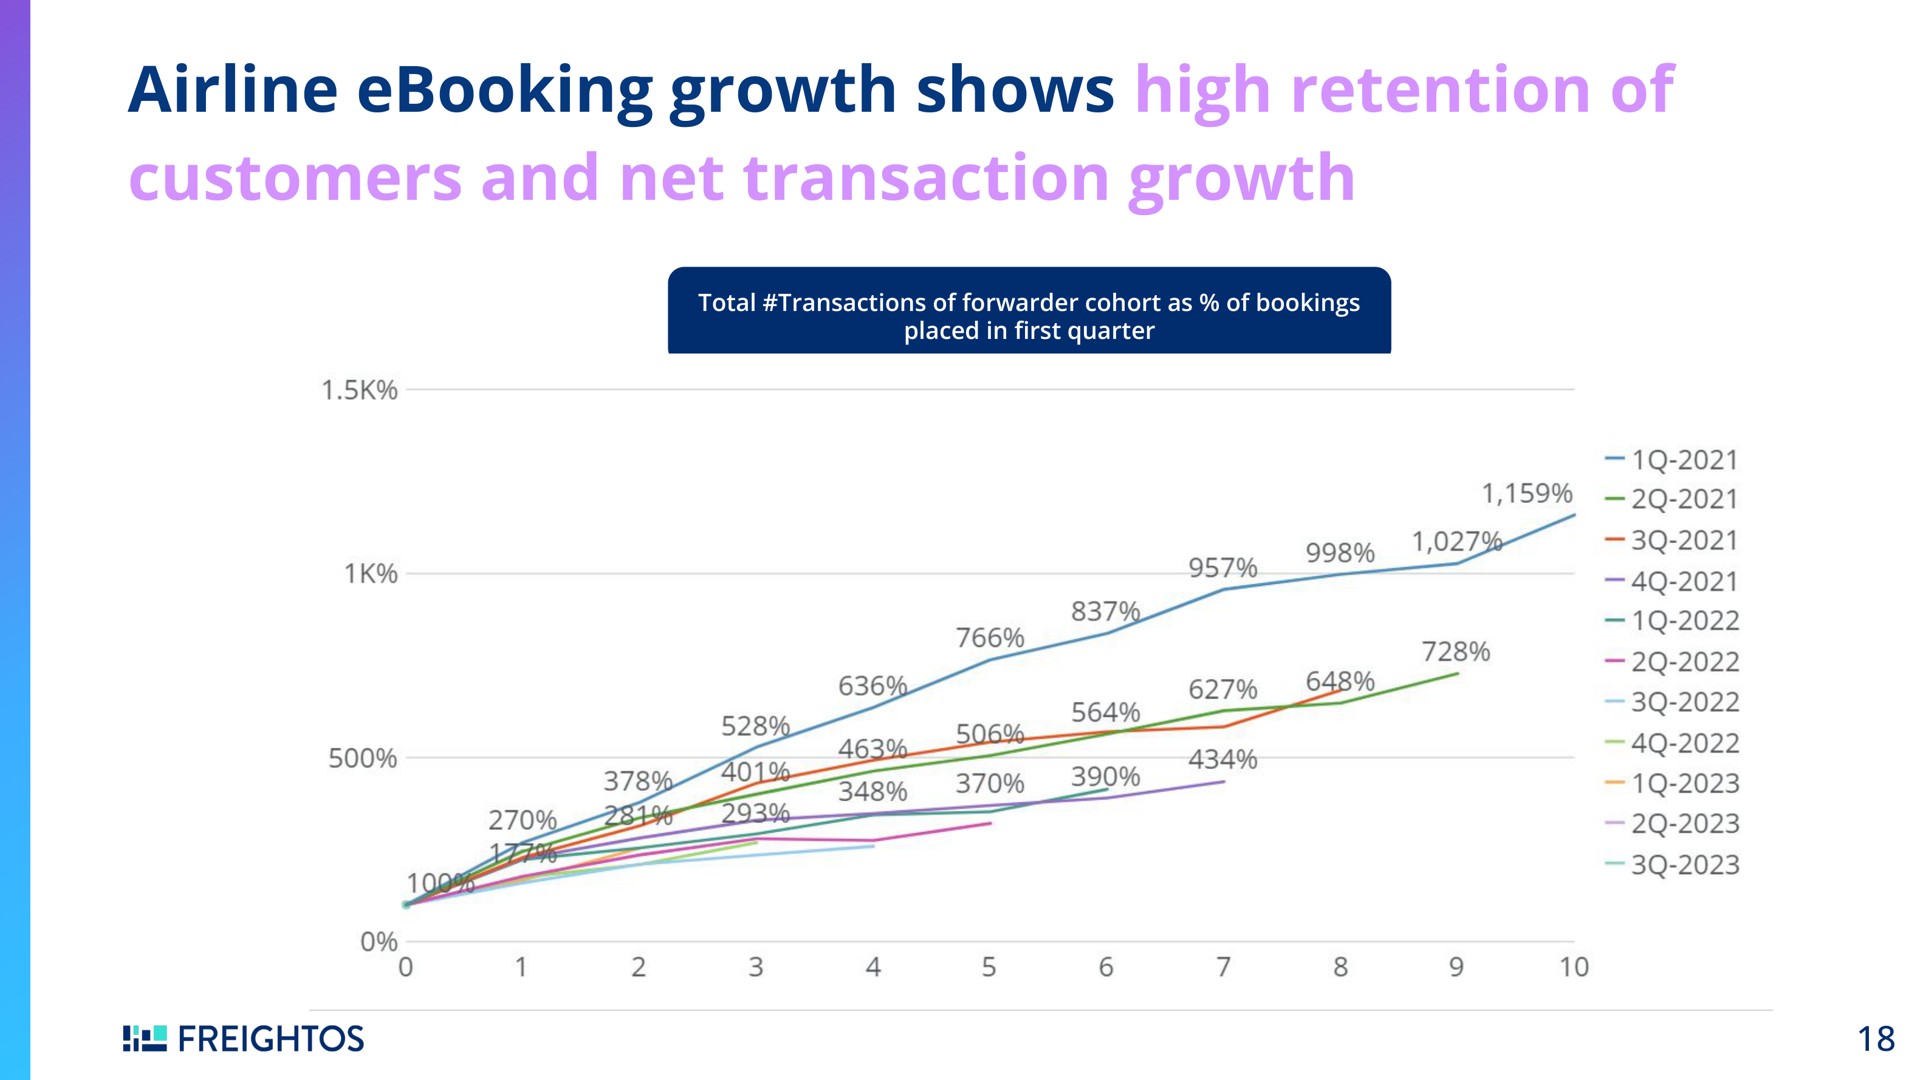 growth shows high retention of customers and net transaction growth | Freightos